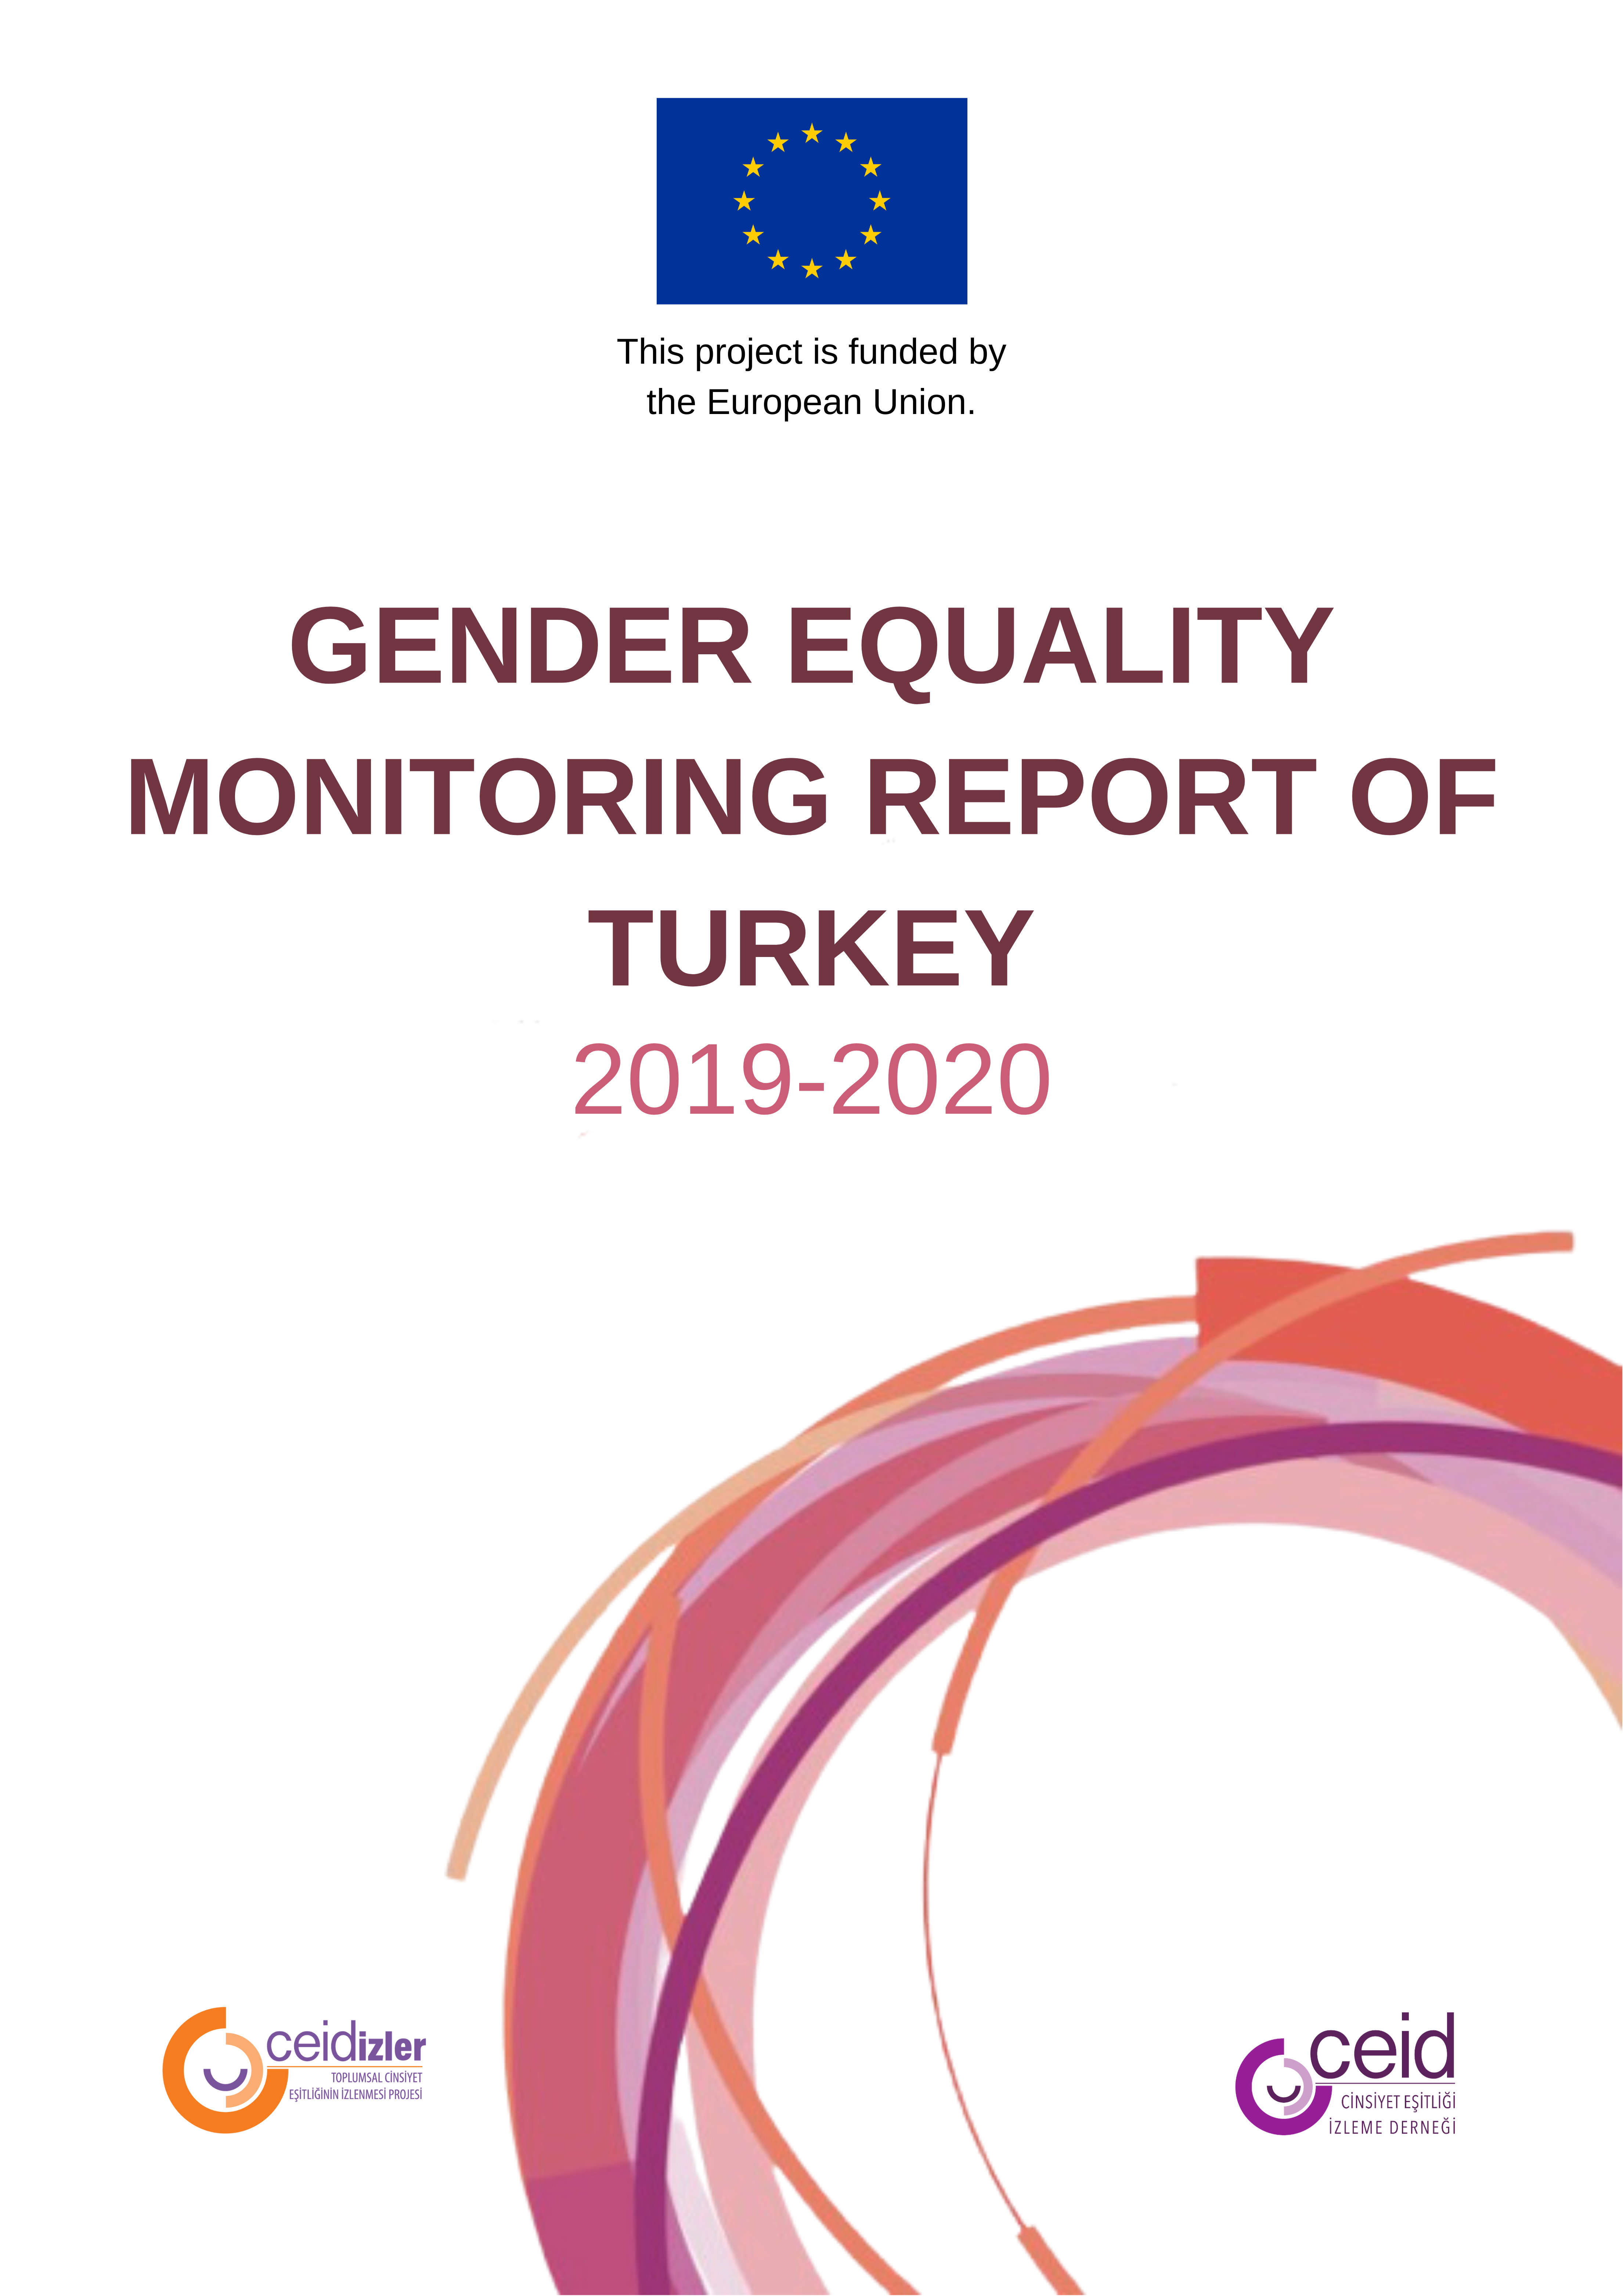 Gender Equality Monitoring Report of Turkey 2019-2020